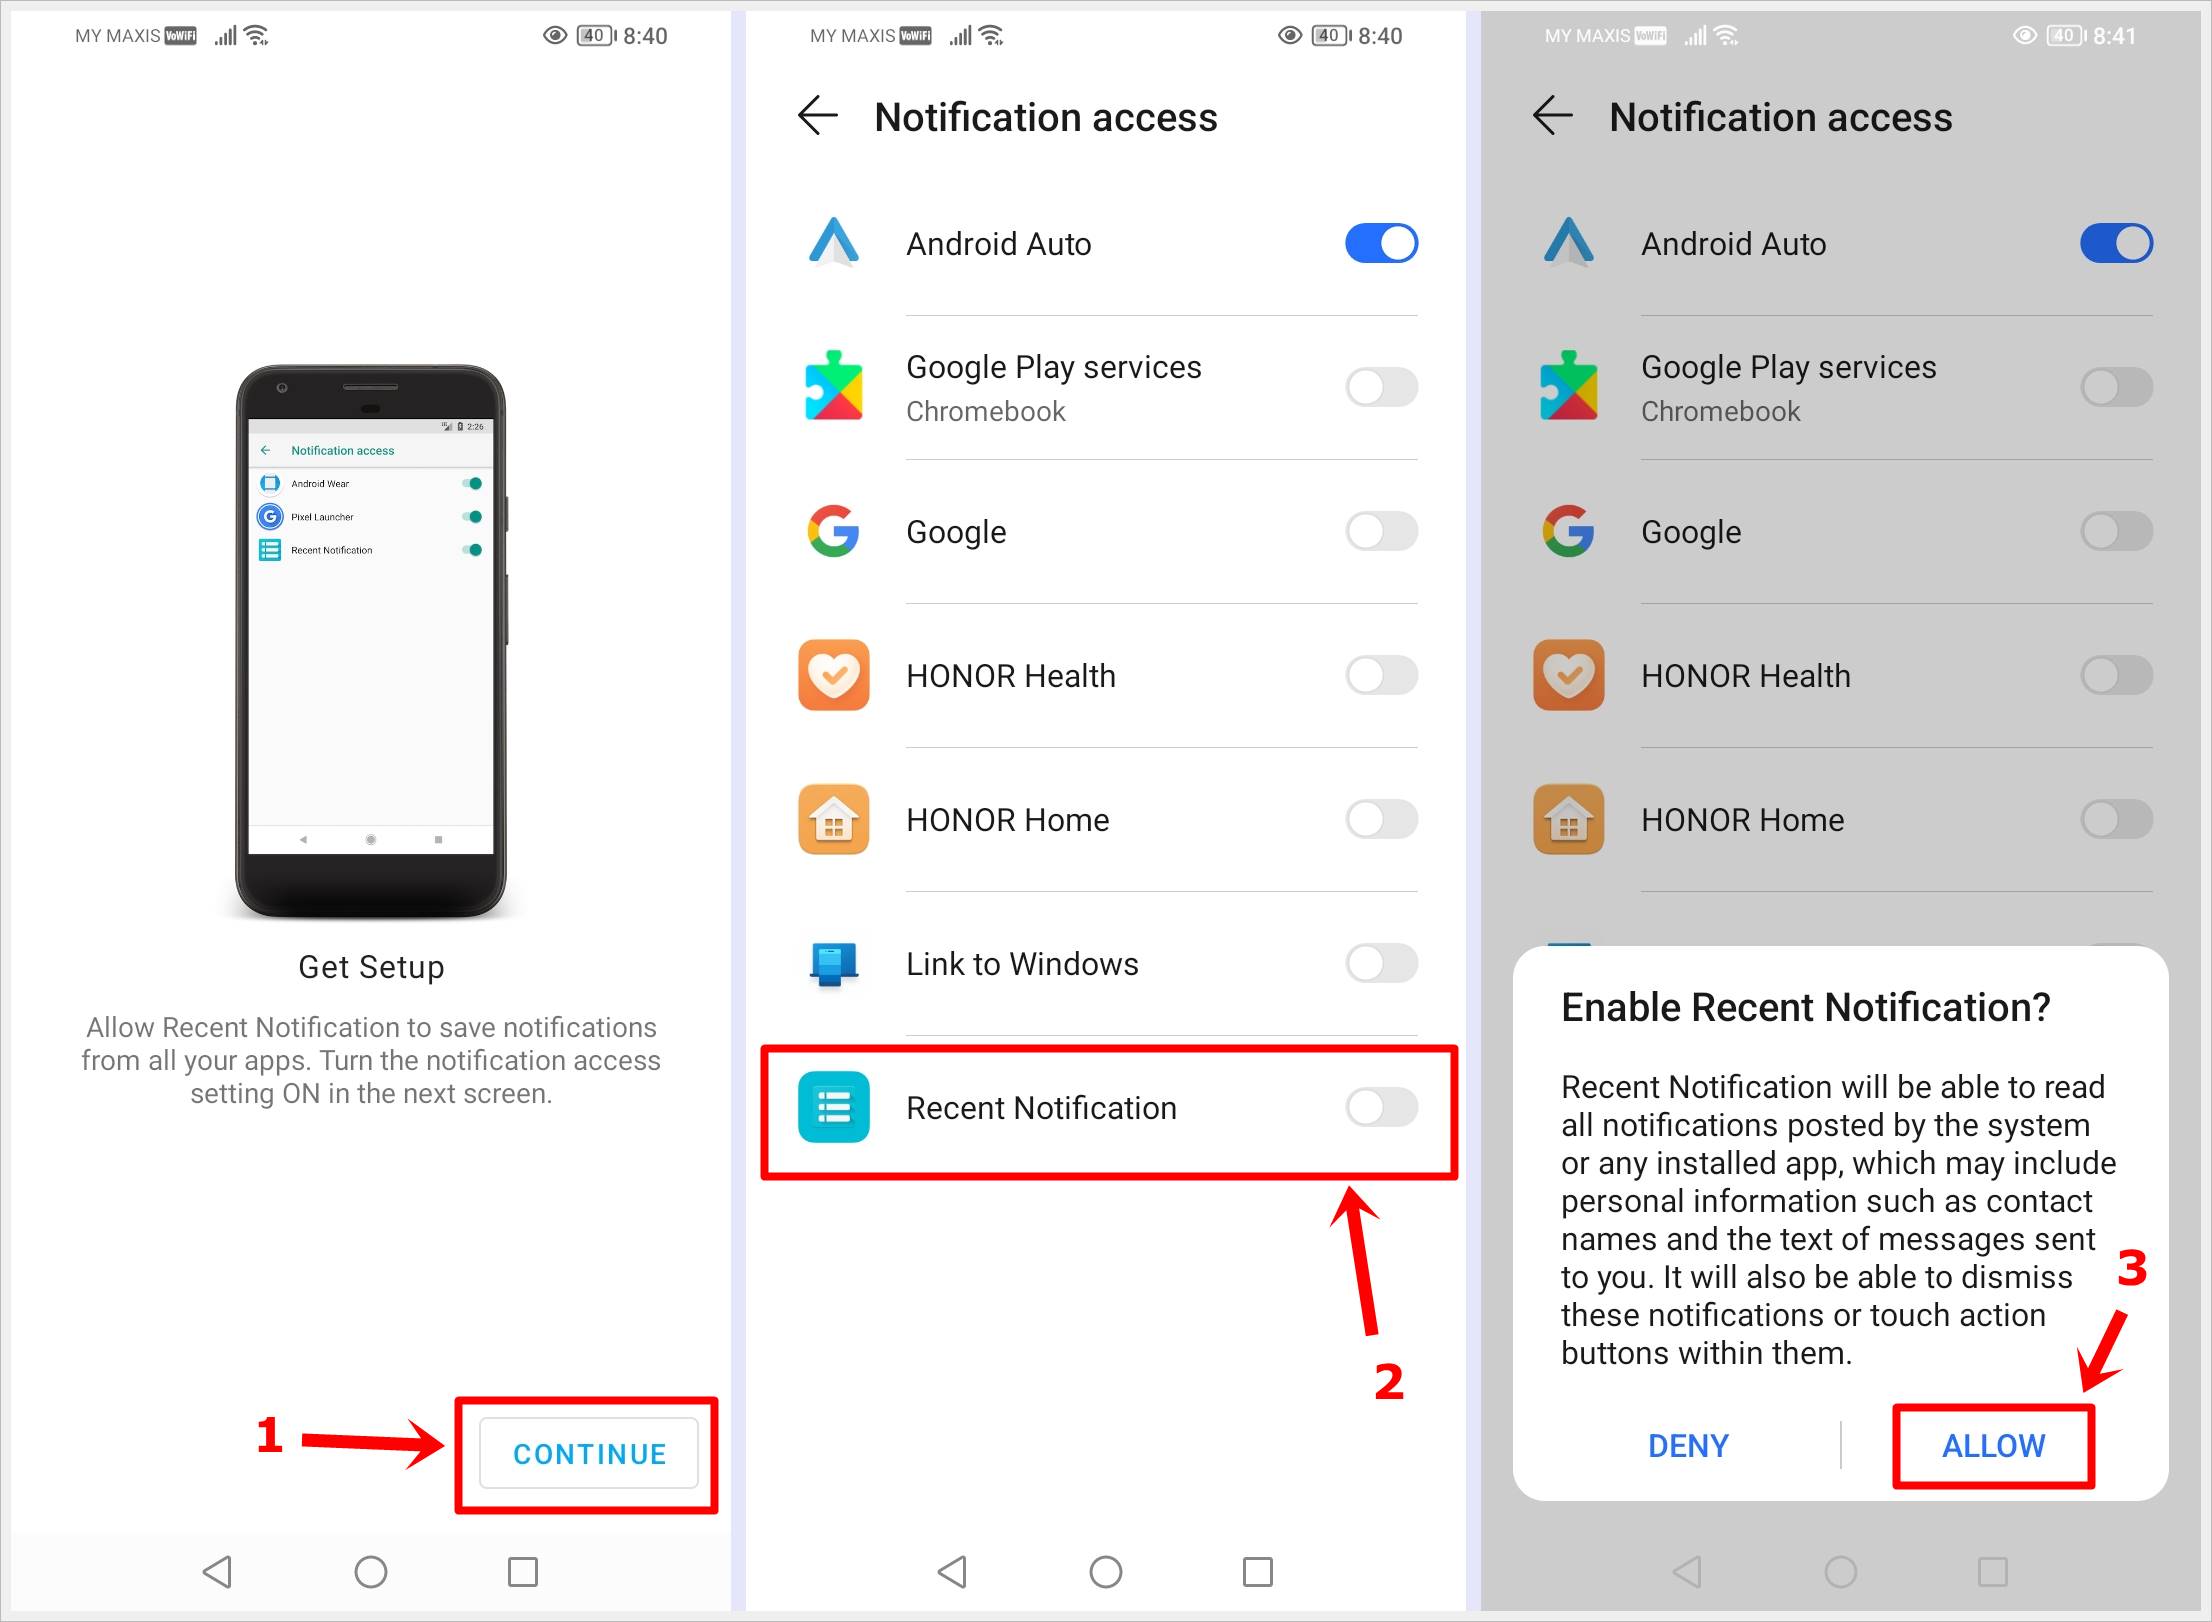 This image shows three different screenshots, illustrating a step-by-step guide on how to enable 'Recent Notification' on an Android phone.